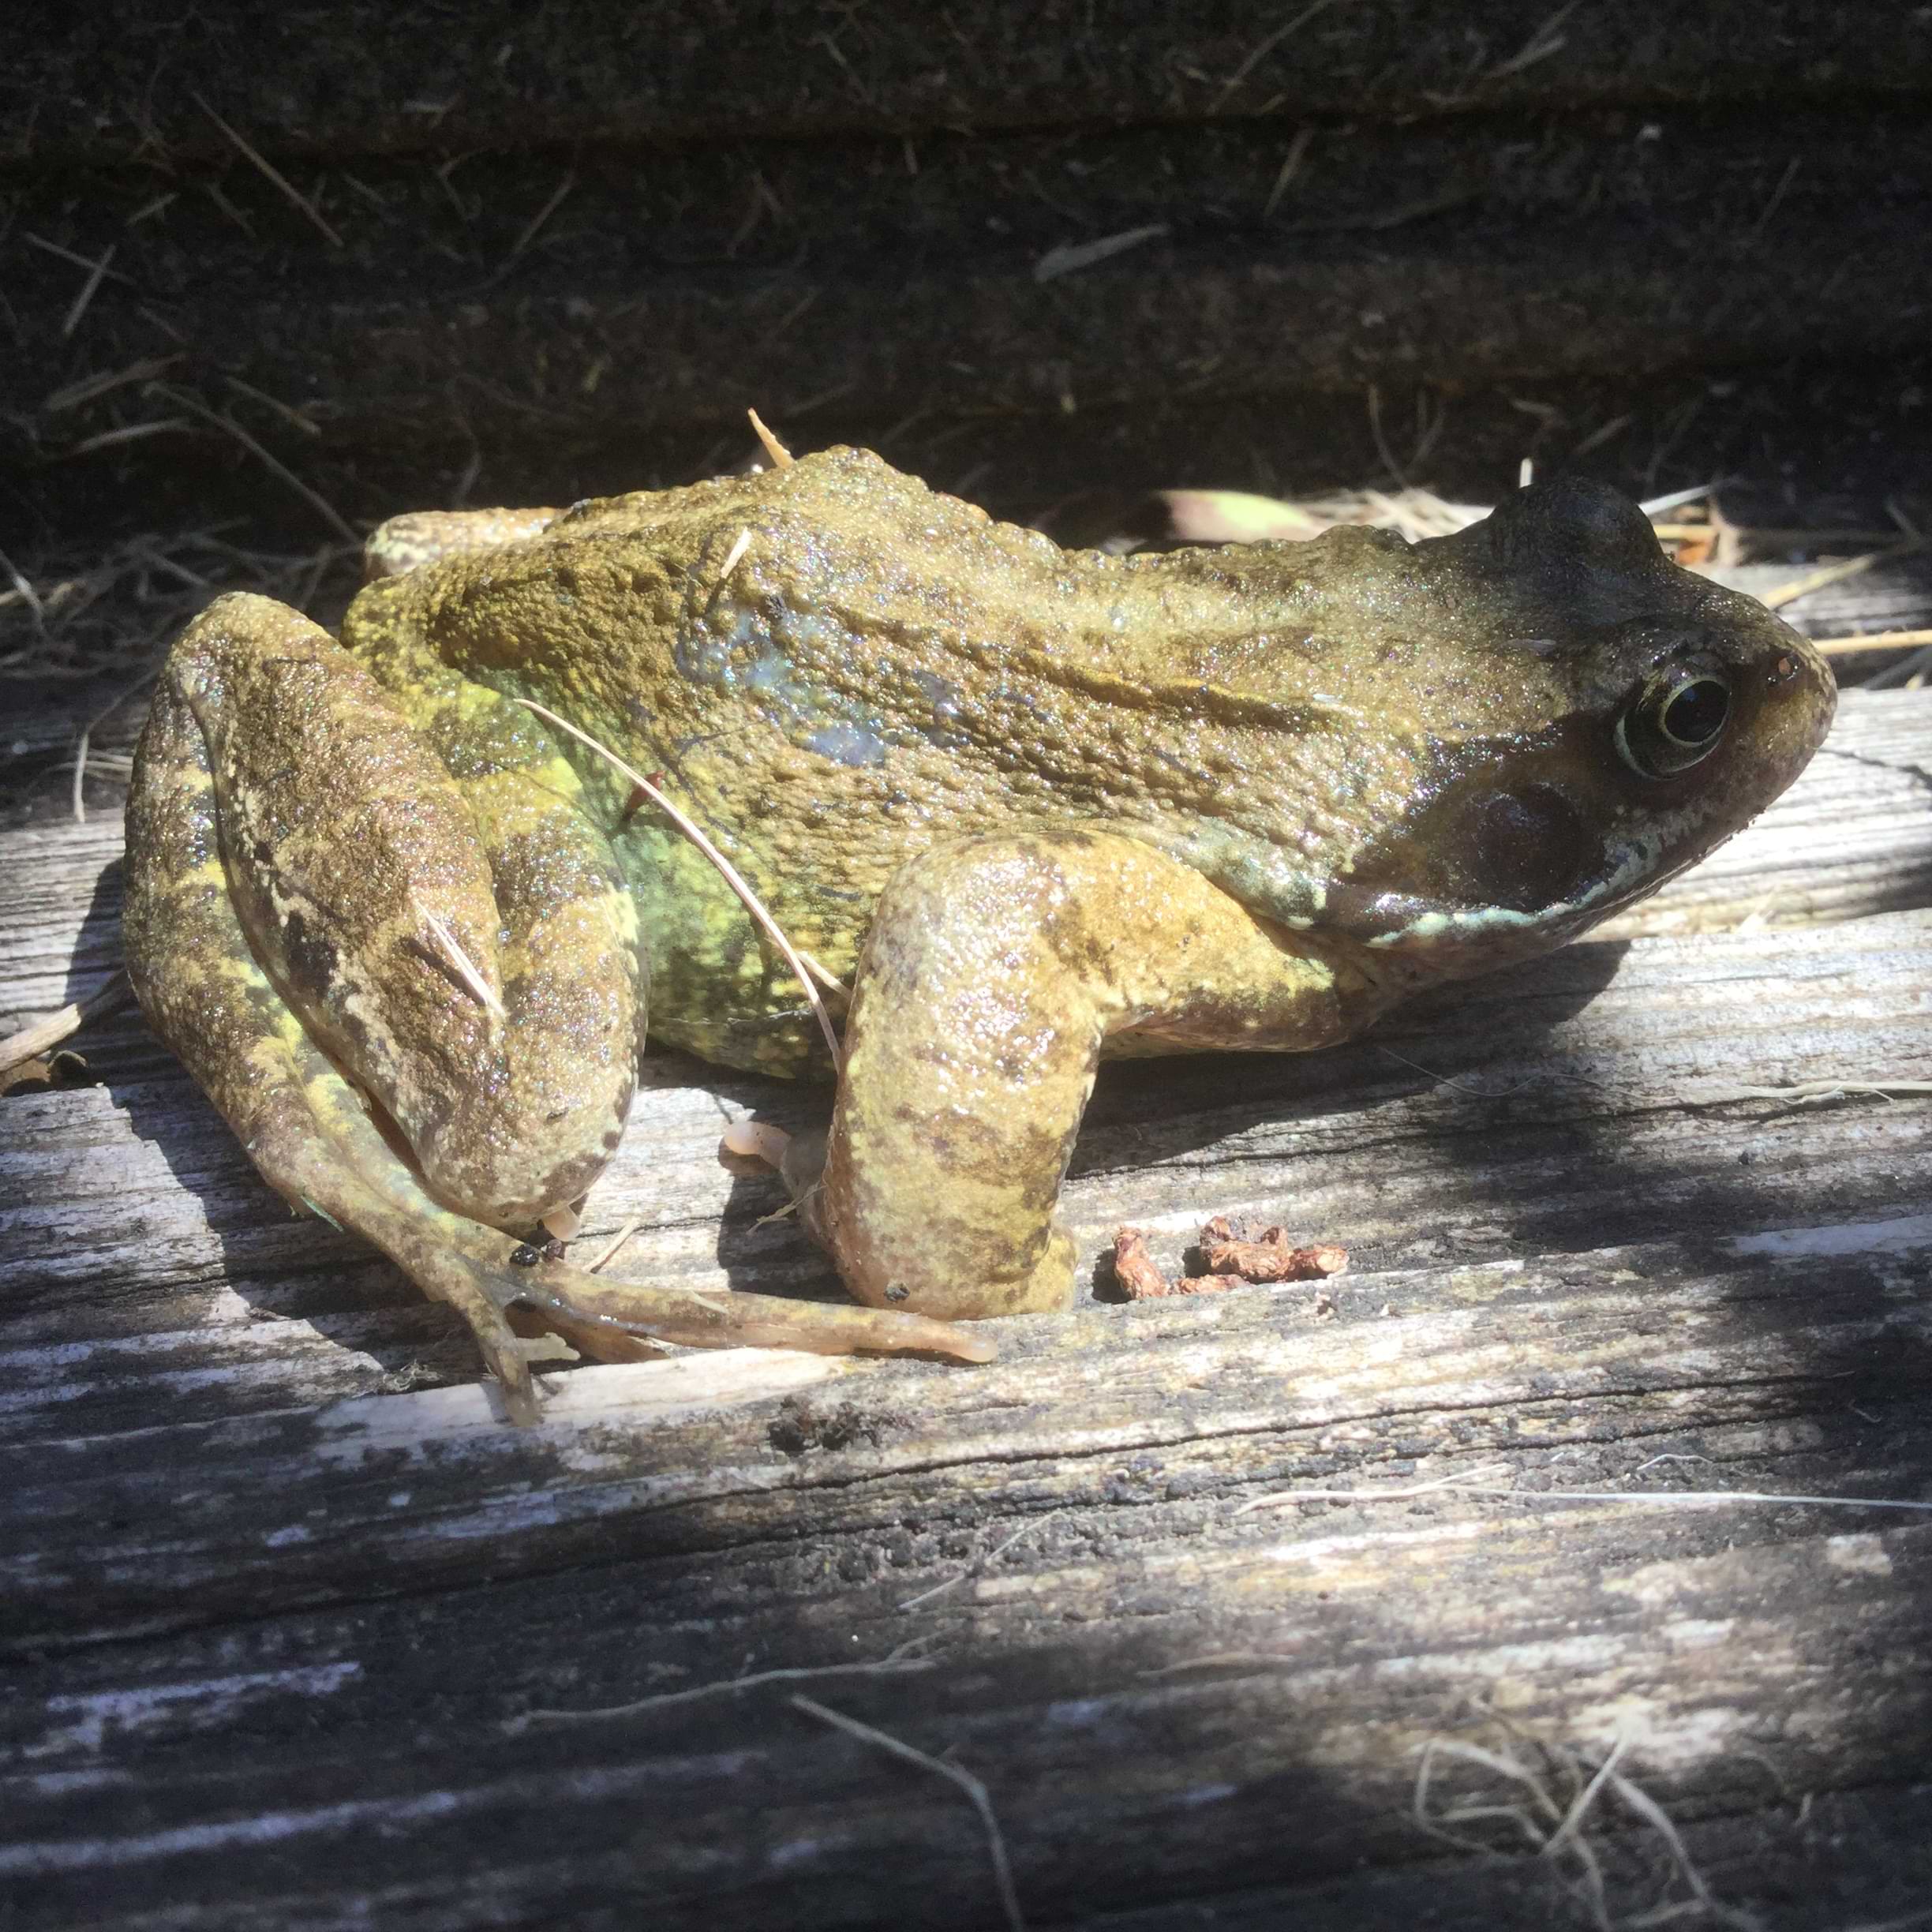 Photo of a frog sitting on wooden decking in the sun. The frog is covered in small bumps and is a vivid mixture of lighter and darker greens. She has golden eyes, a round dark patch on her cheeks, and has banded stripes on her legs.